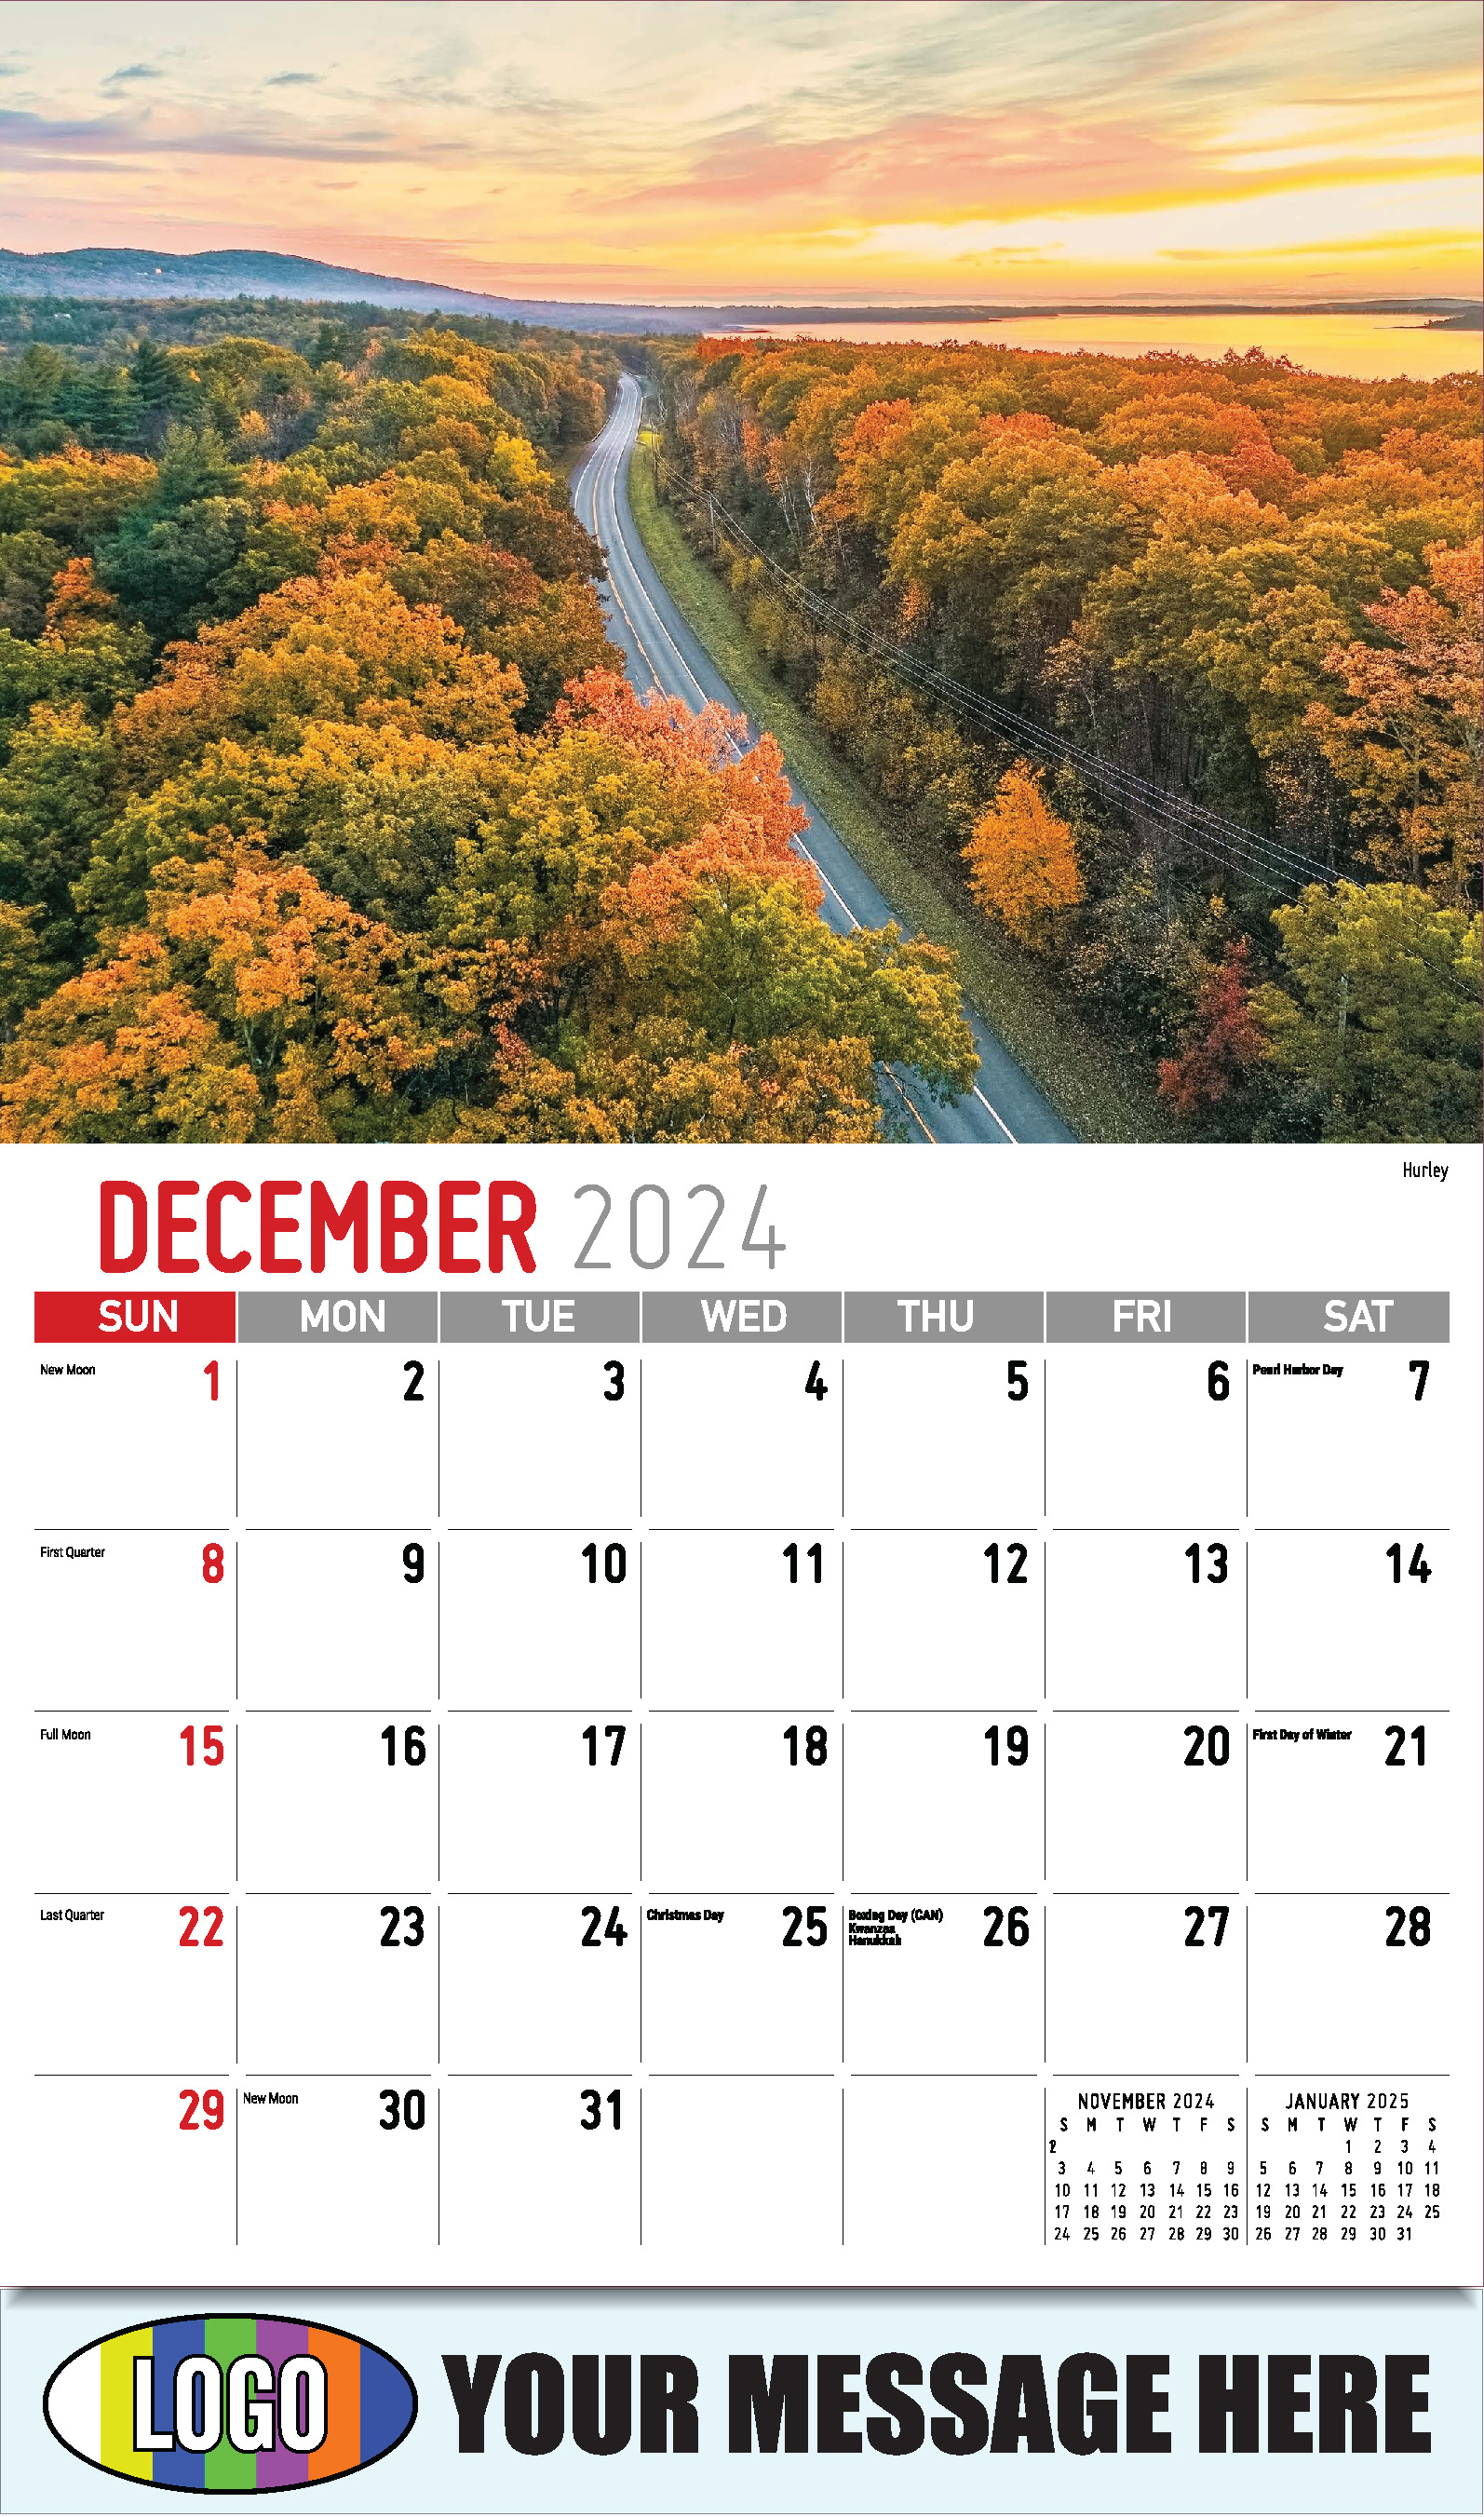 Scenes of New York 2025 Business Promotional Wall Calendar - December_a